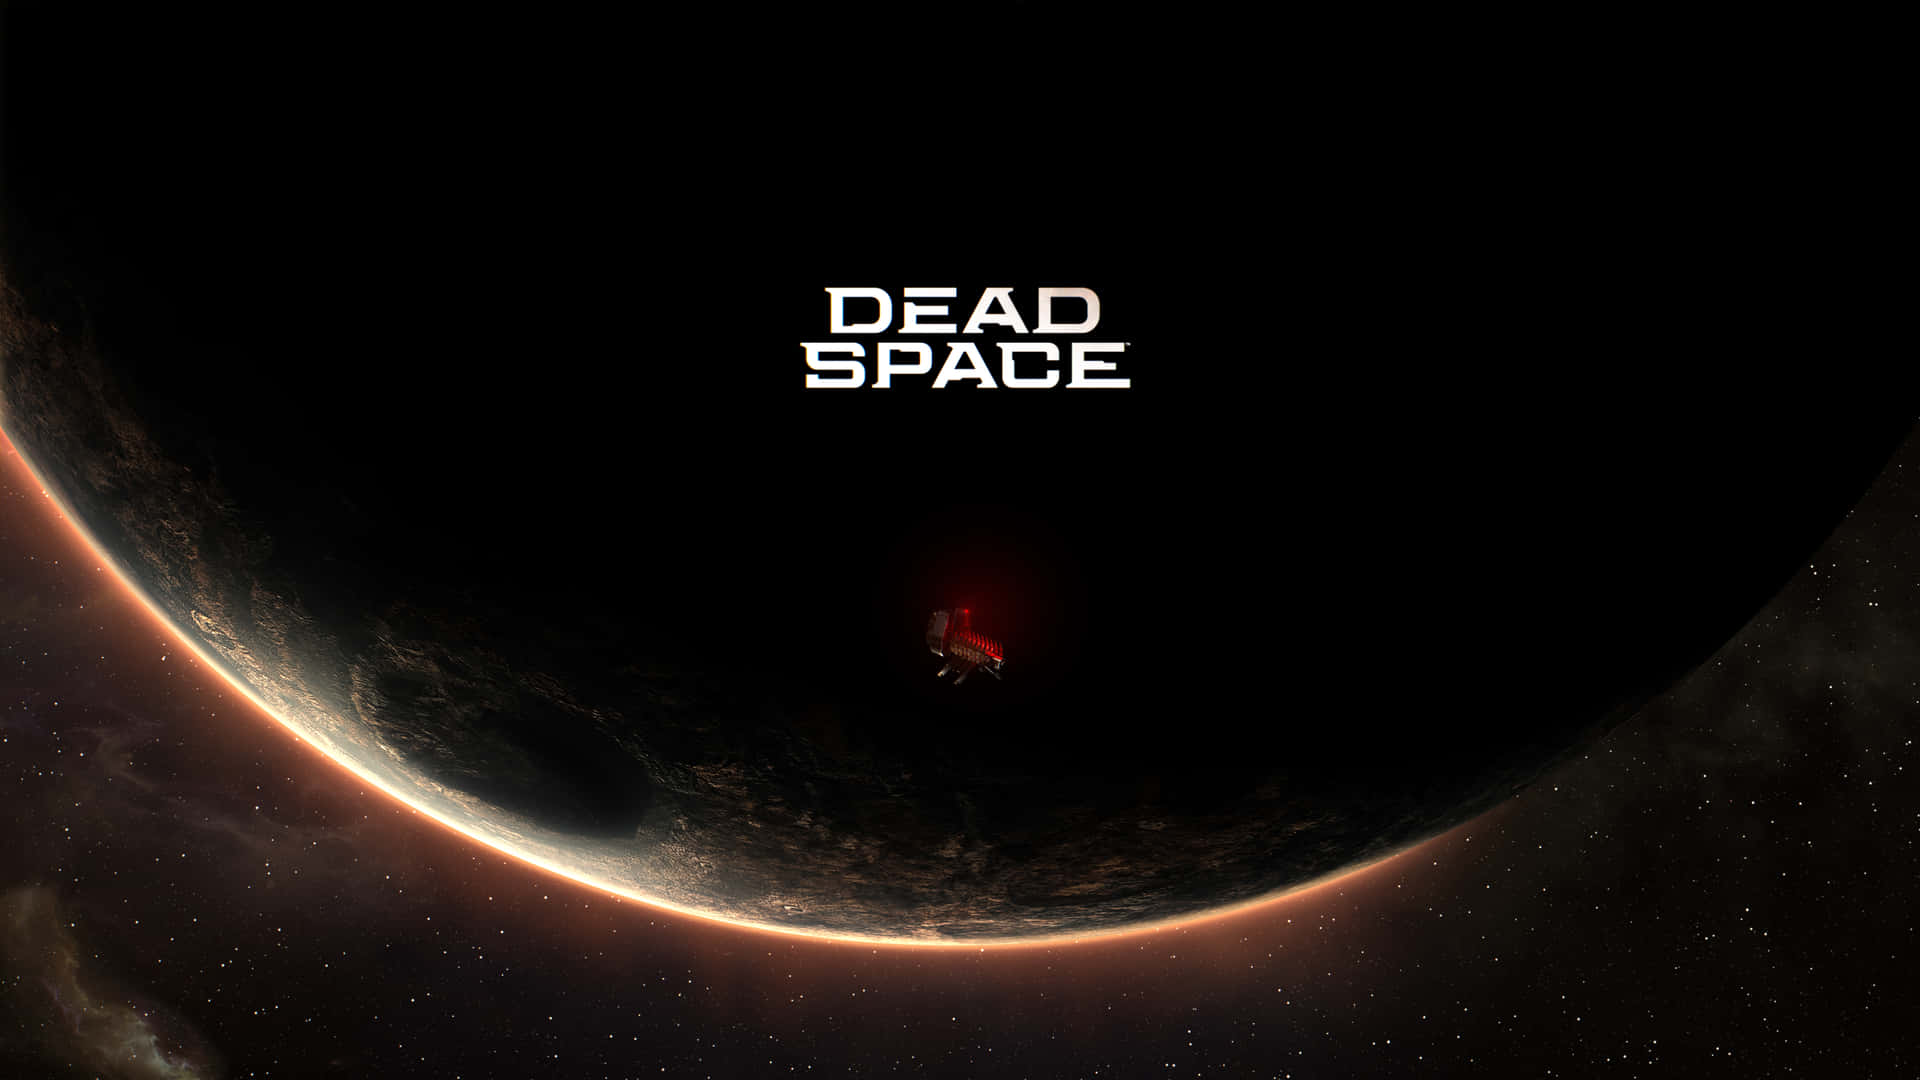 Deadspace 4k In Italian Can Be Translated As 